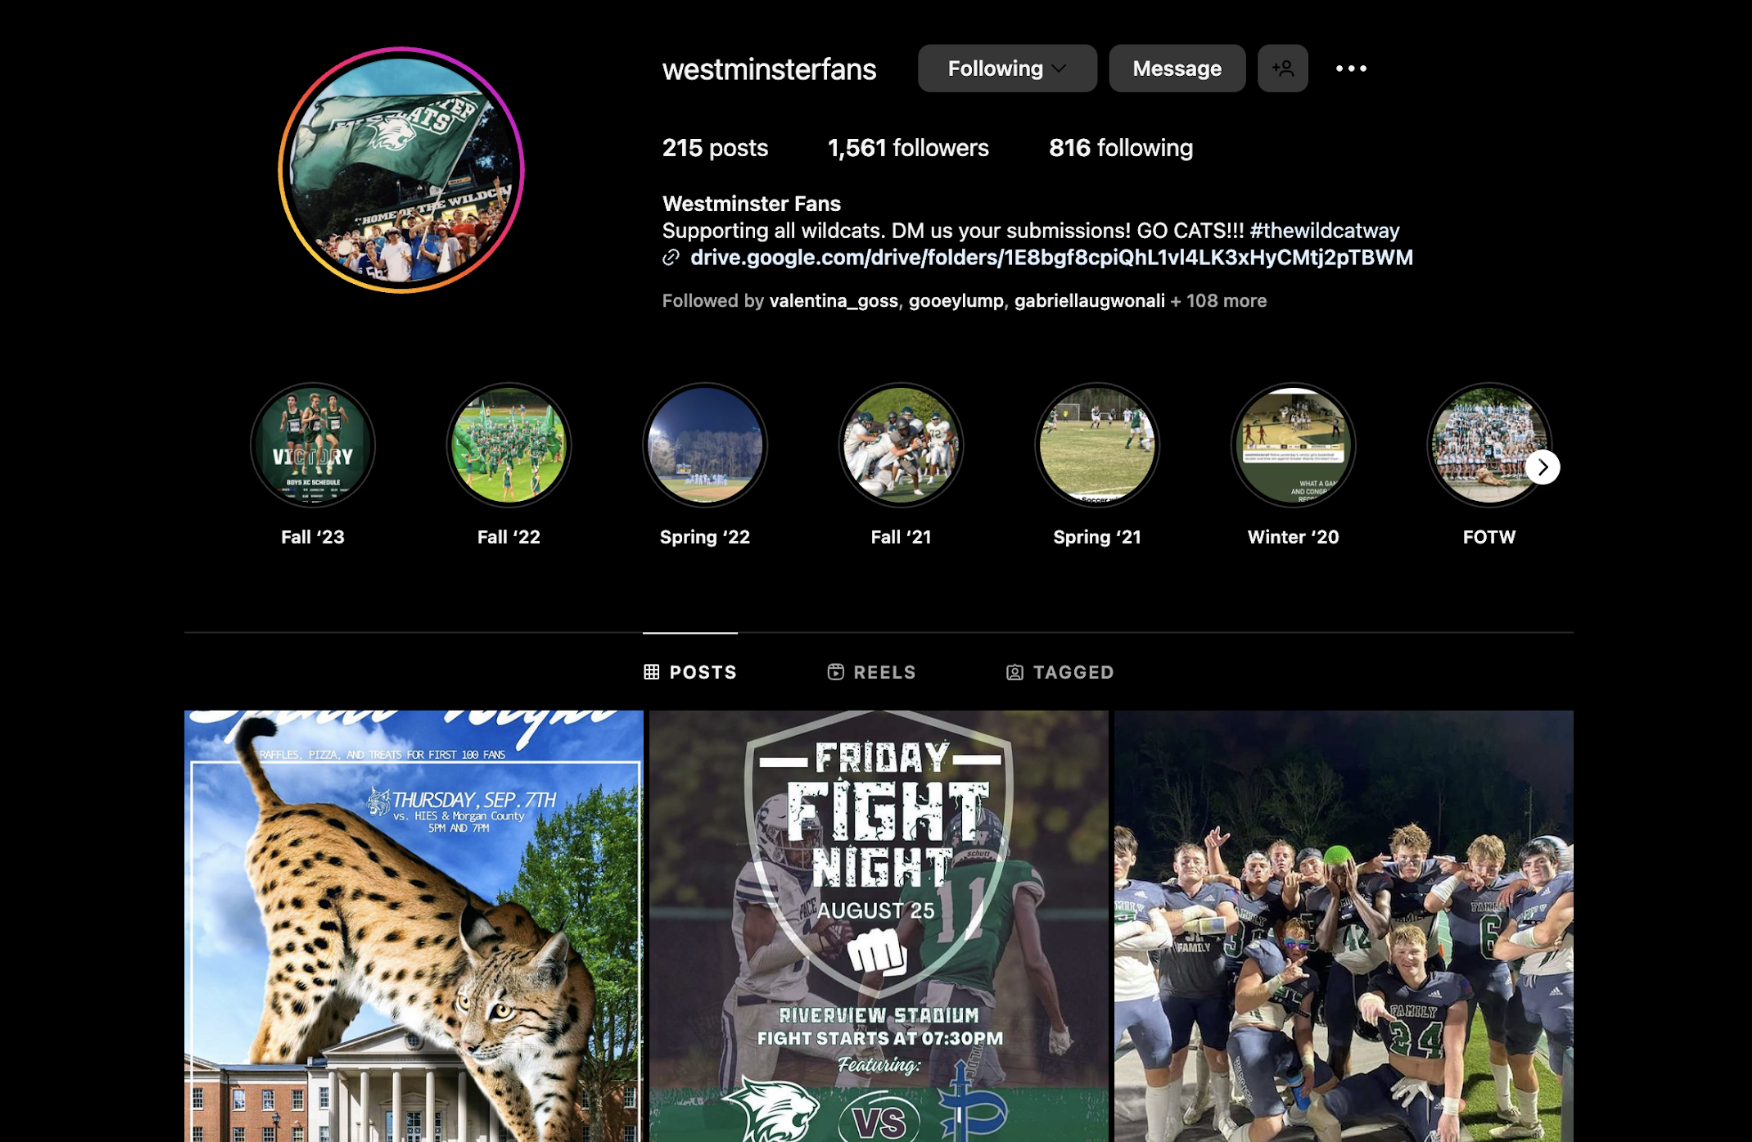 The Westminster Fans Instagram Account; used to promote games, recognize athlete’s achievements, and highlight certain events.